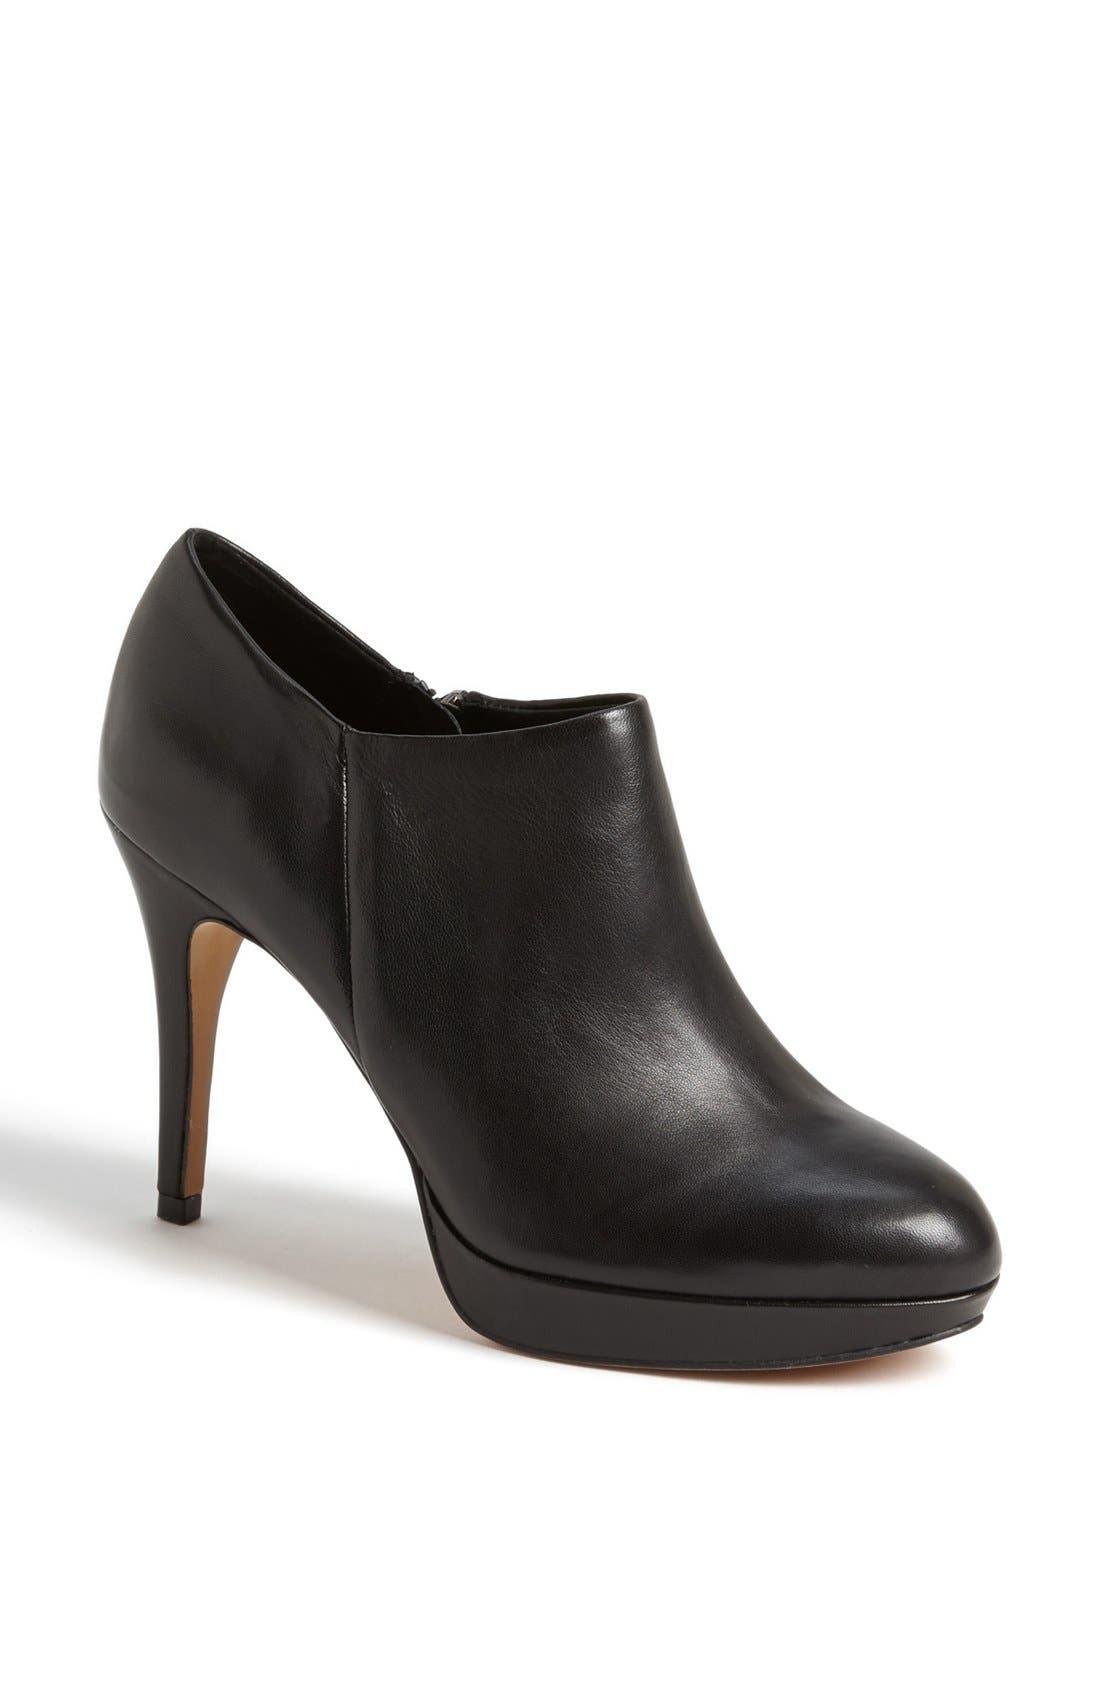 UPC 886216641332 product image for Women's Vince Camuto 'Elvin' Bootie, Size 6.5 M - Black | upcitemdb.com